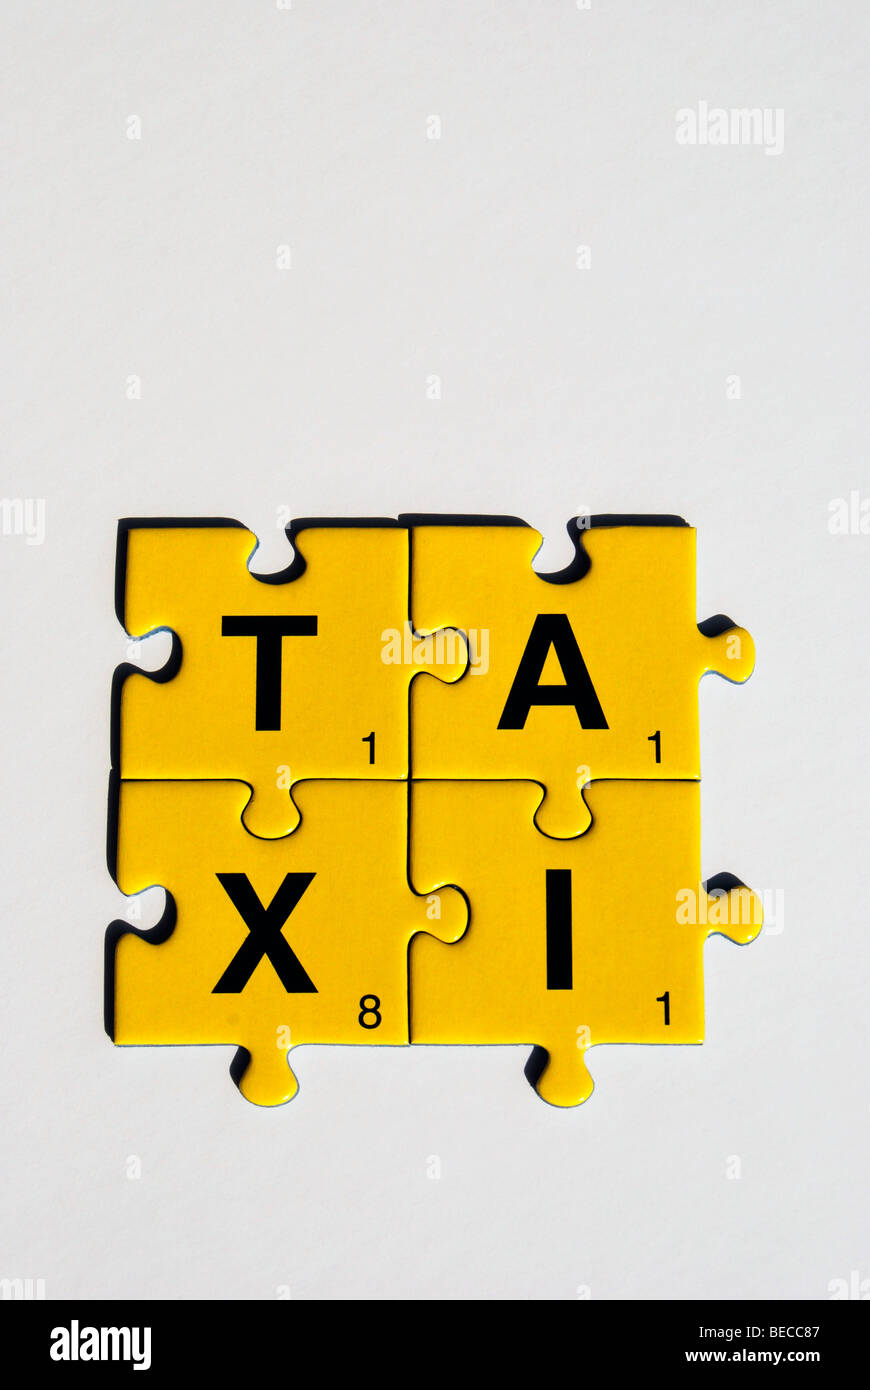 Puzzle pieces building the word taxi Stock Photo